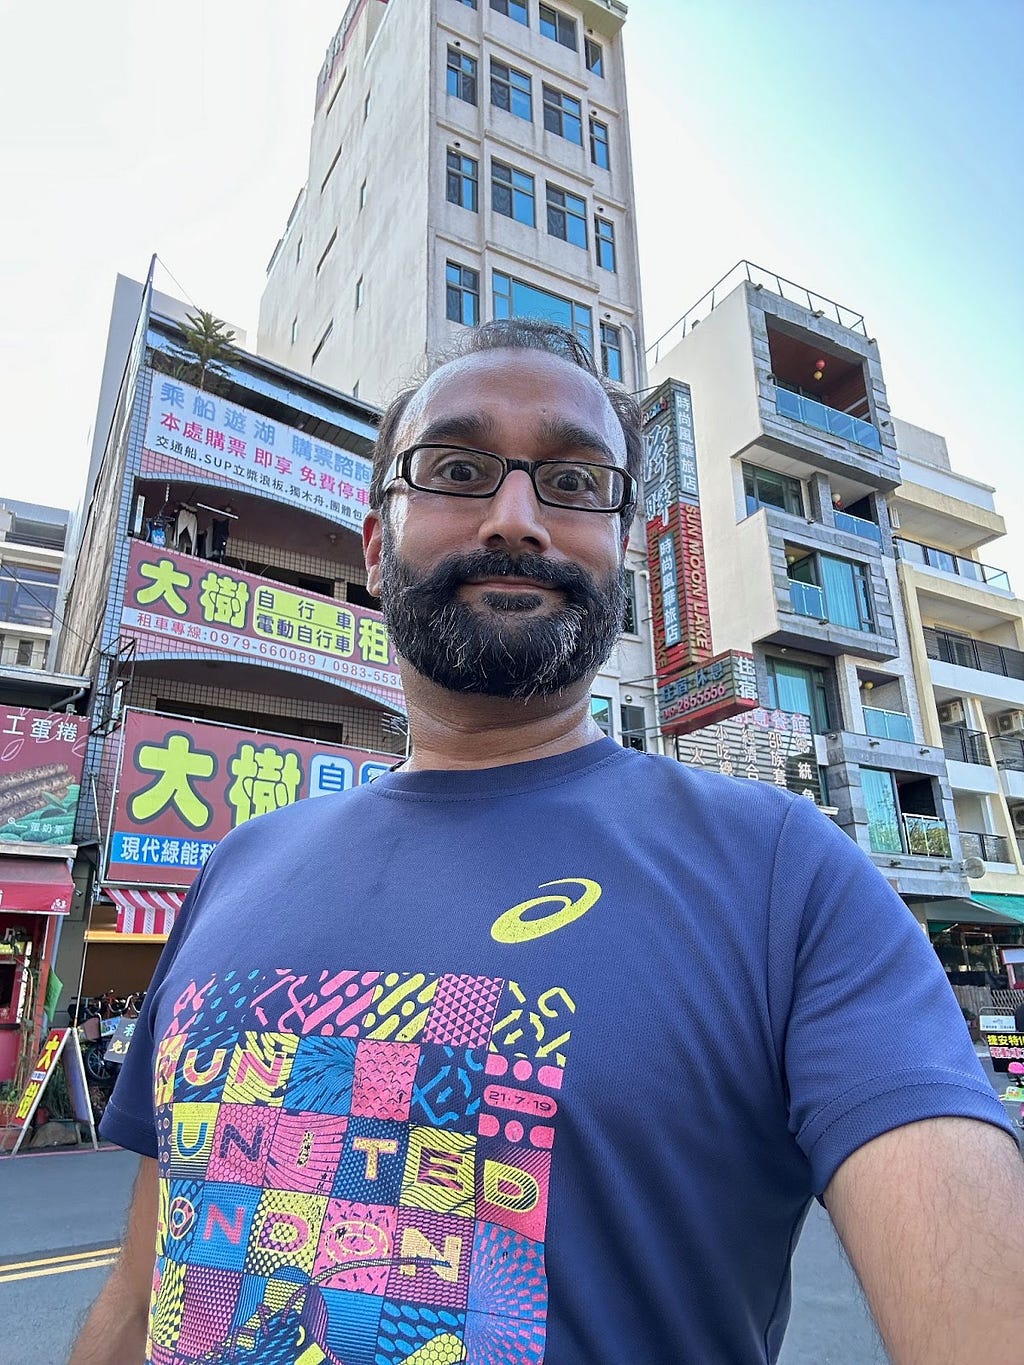 Selfie of brown man with beard and glasses in a dark blue running top with chinese shops and signs behind.